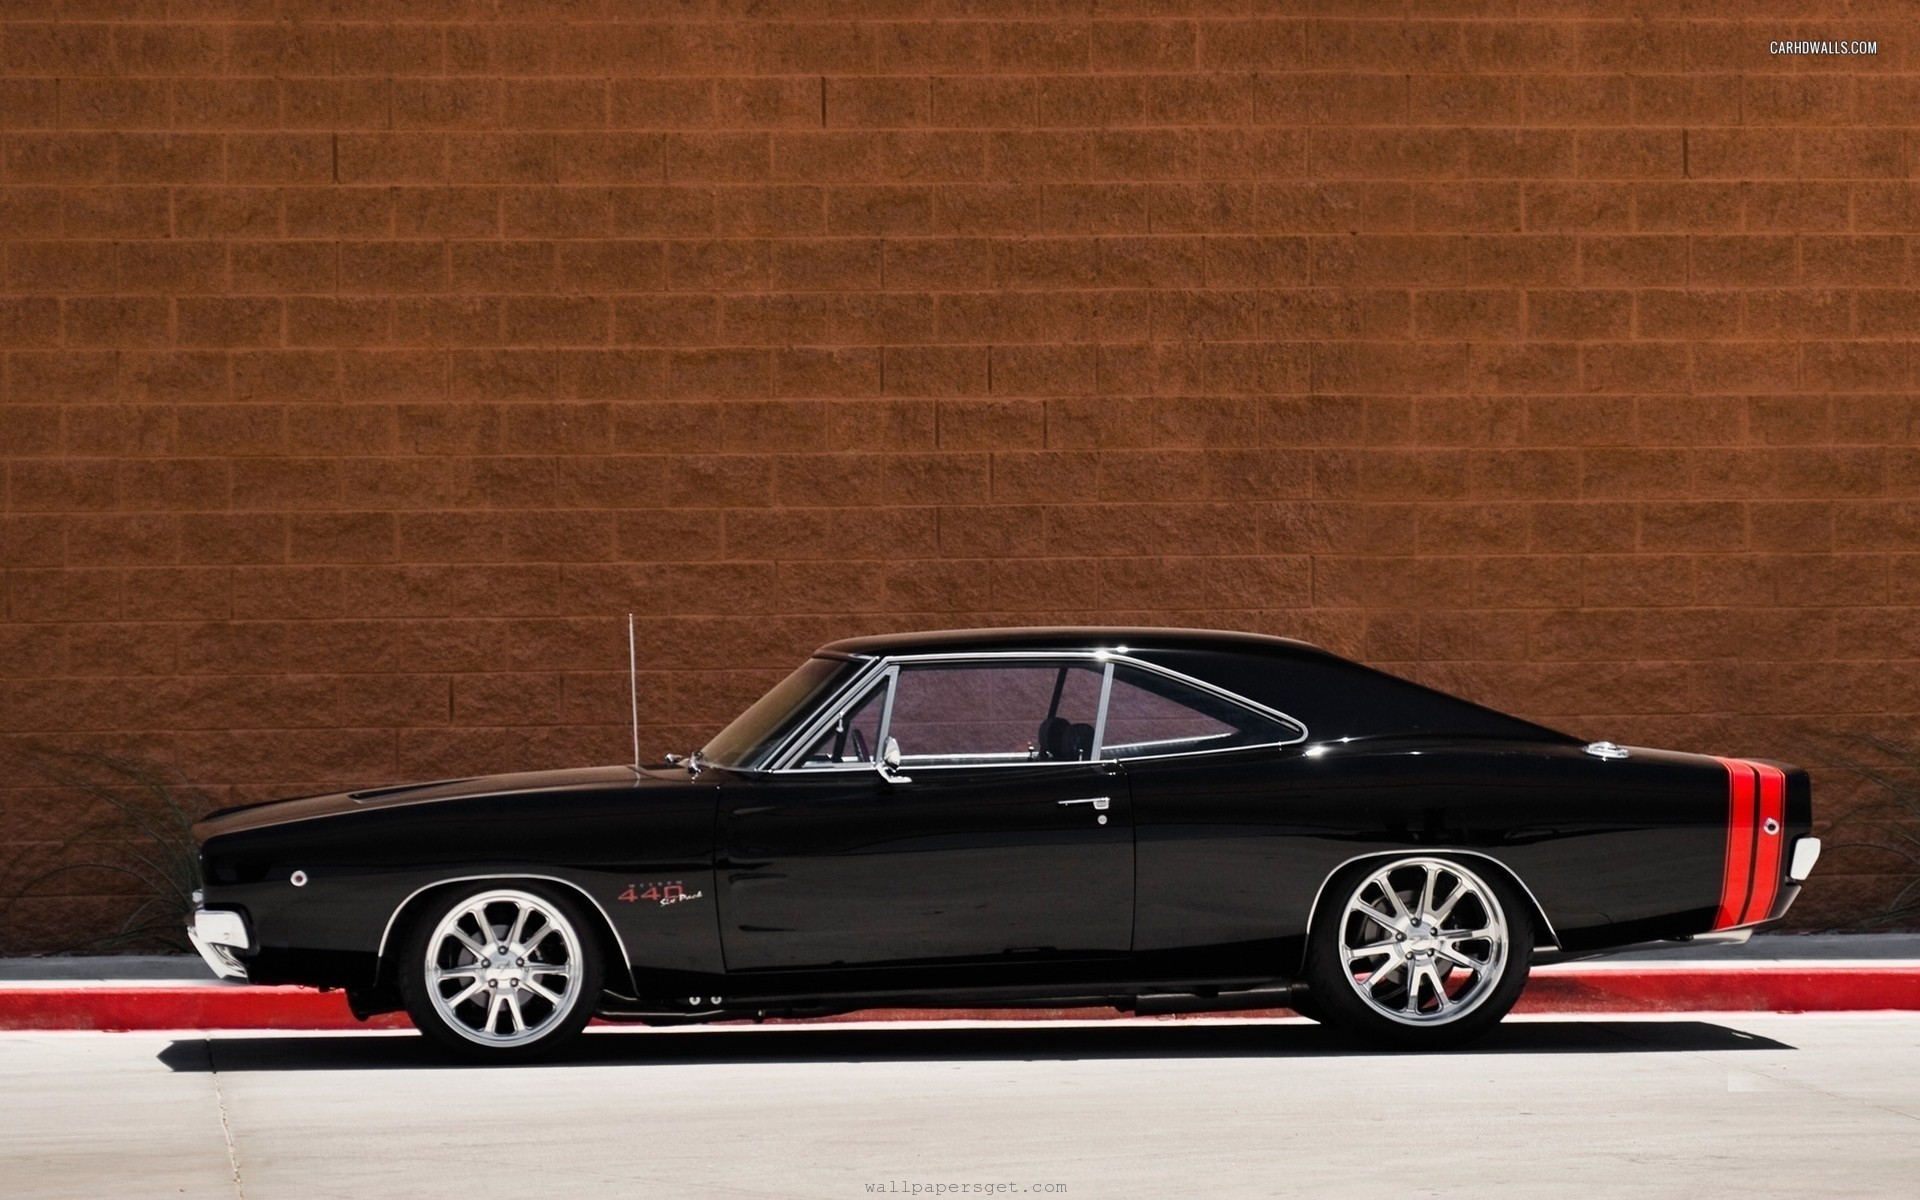 Black Dodge Charger Wallpaper 5927 Hd Wallpapers - Dodge Charger Rt Side - HD Wallpaper 